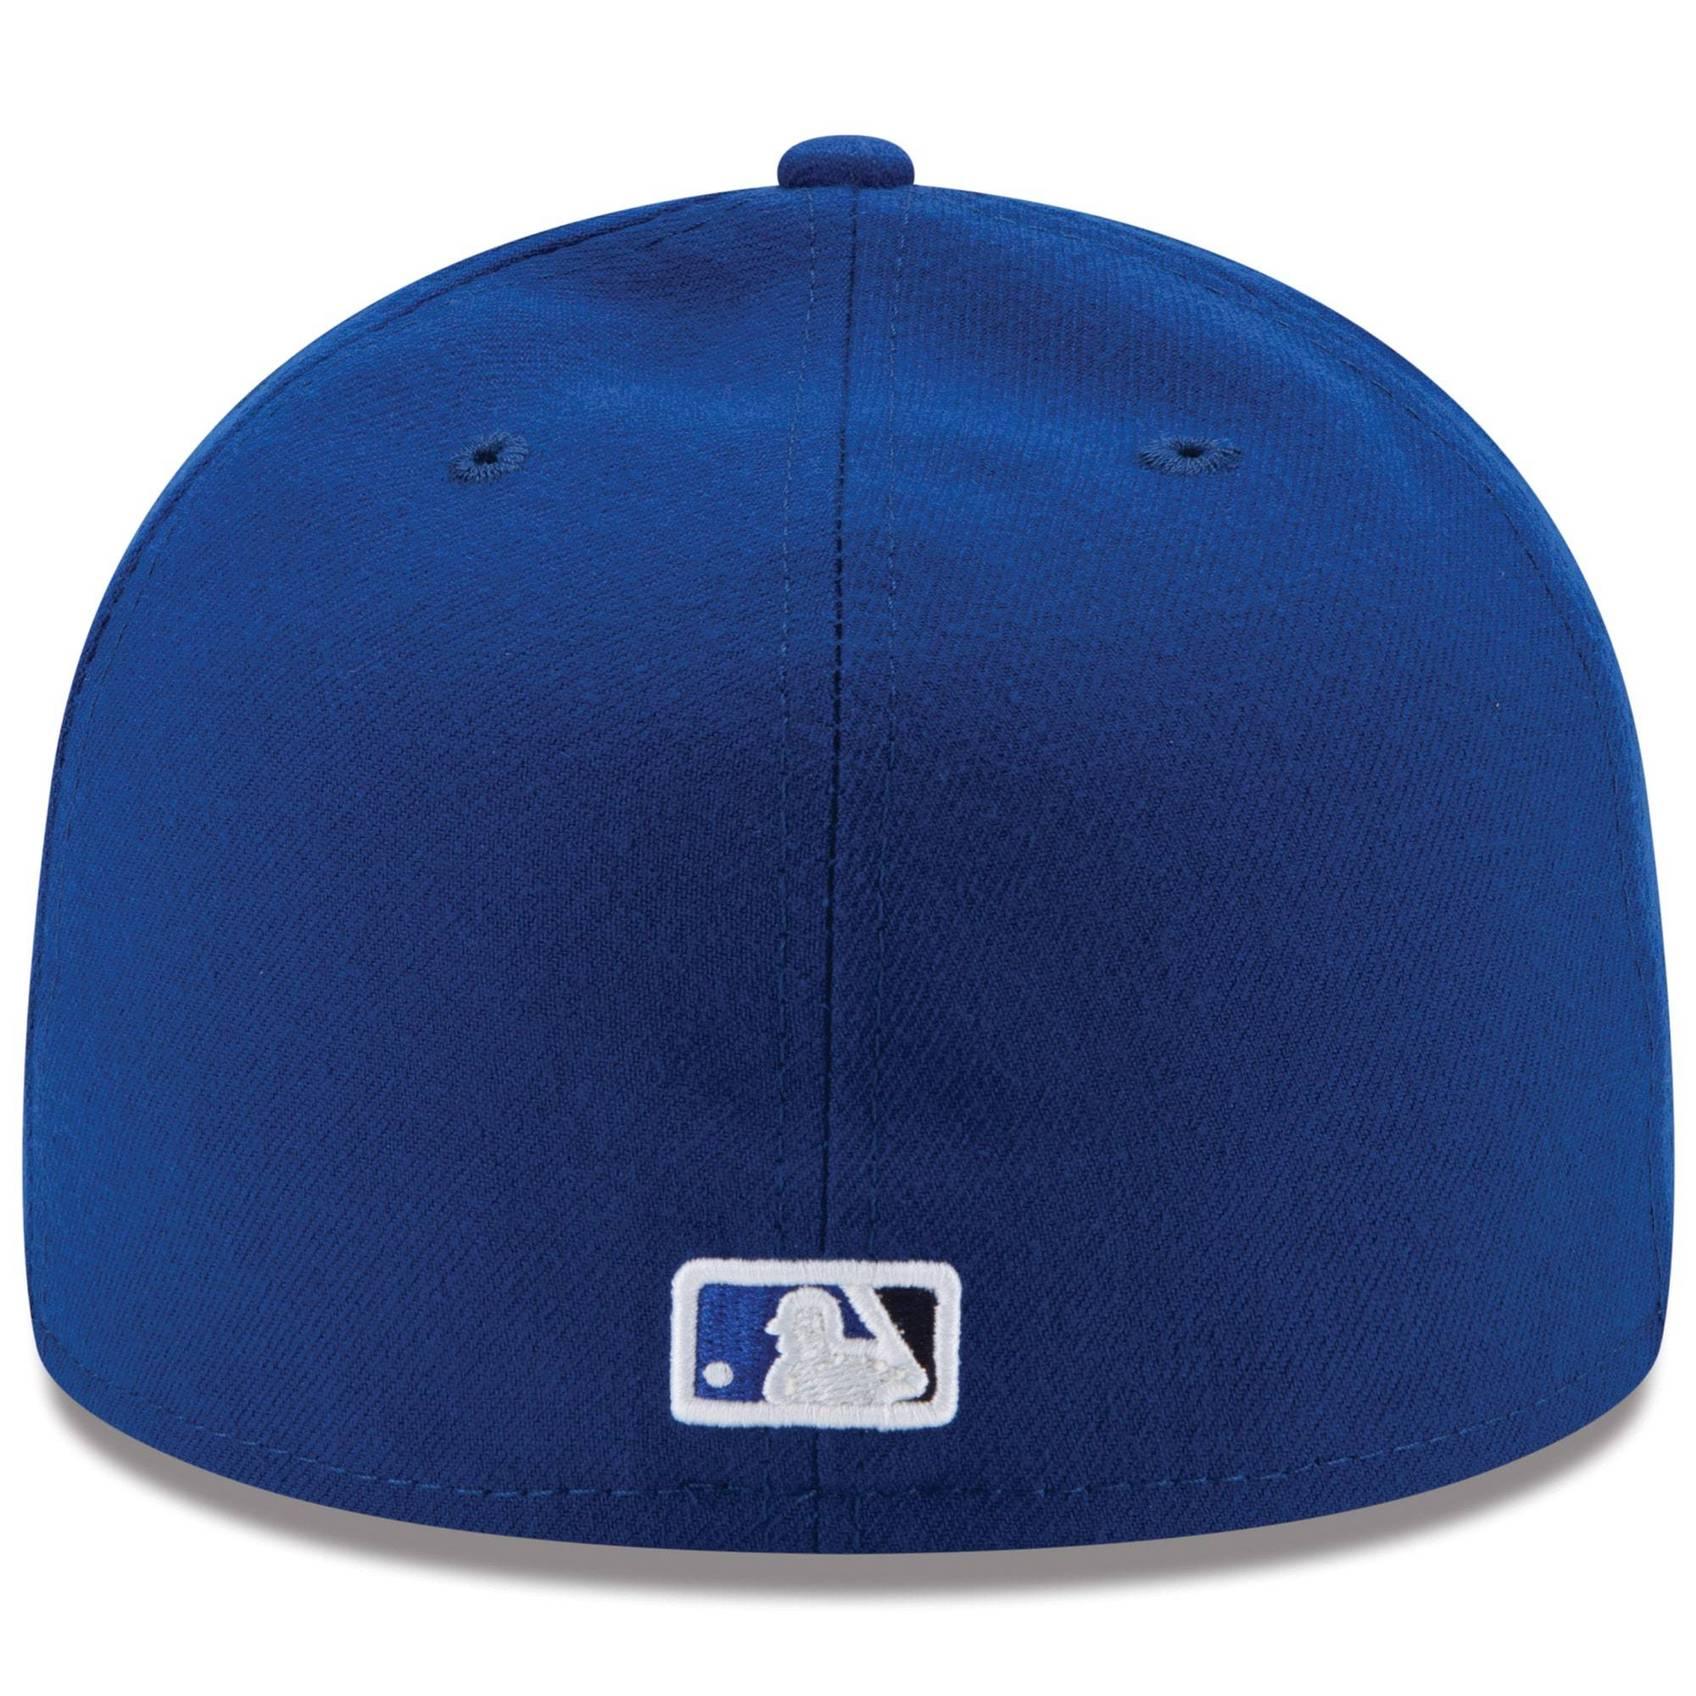 NEW ERA 59FIFTY MLB AUTHENTIC TORONTO BLUE JAYS TEAM FITTED CAP - FAM